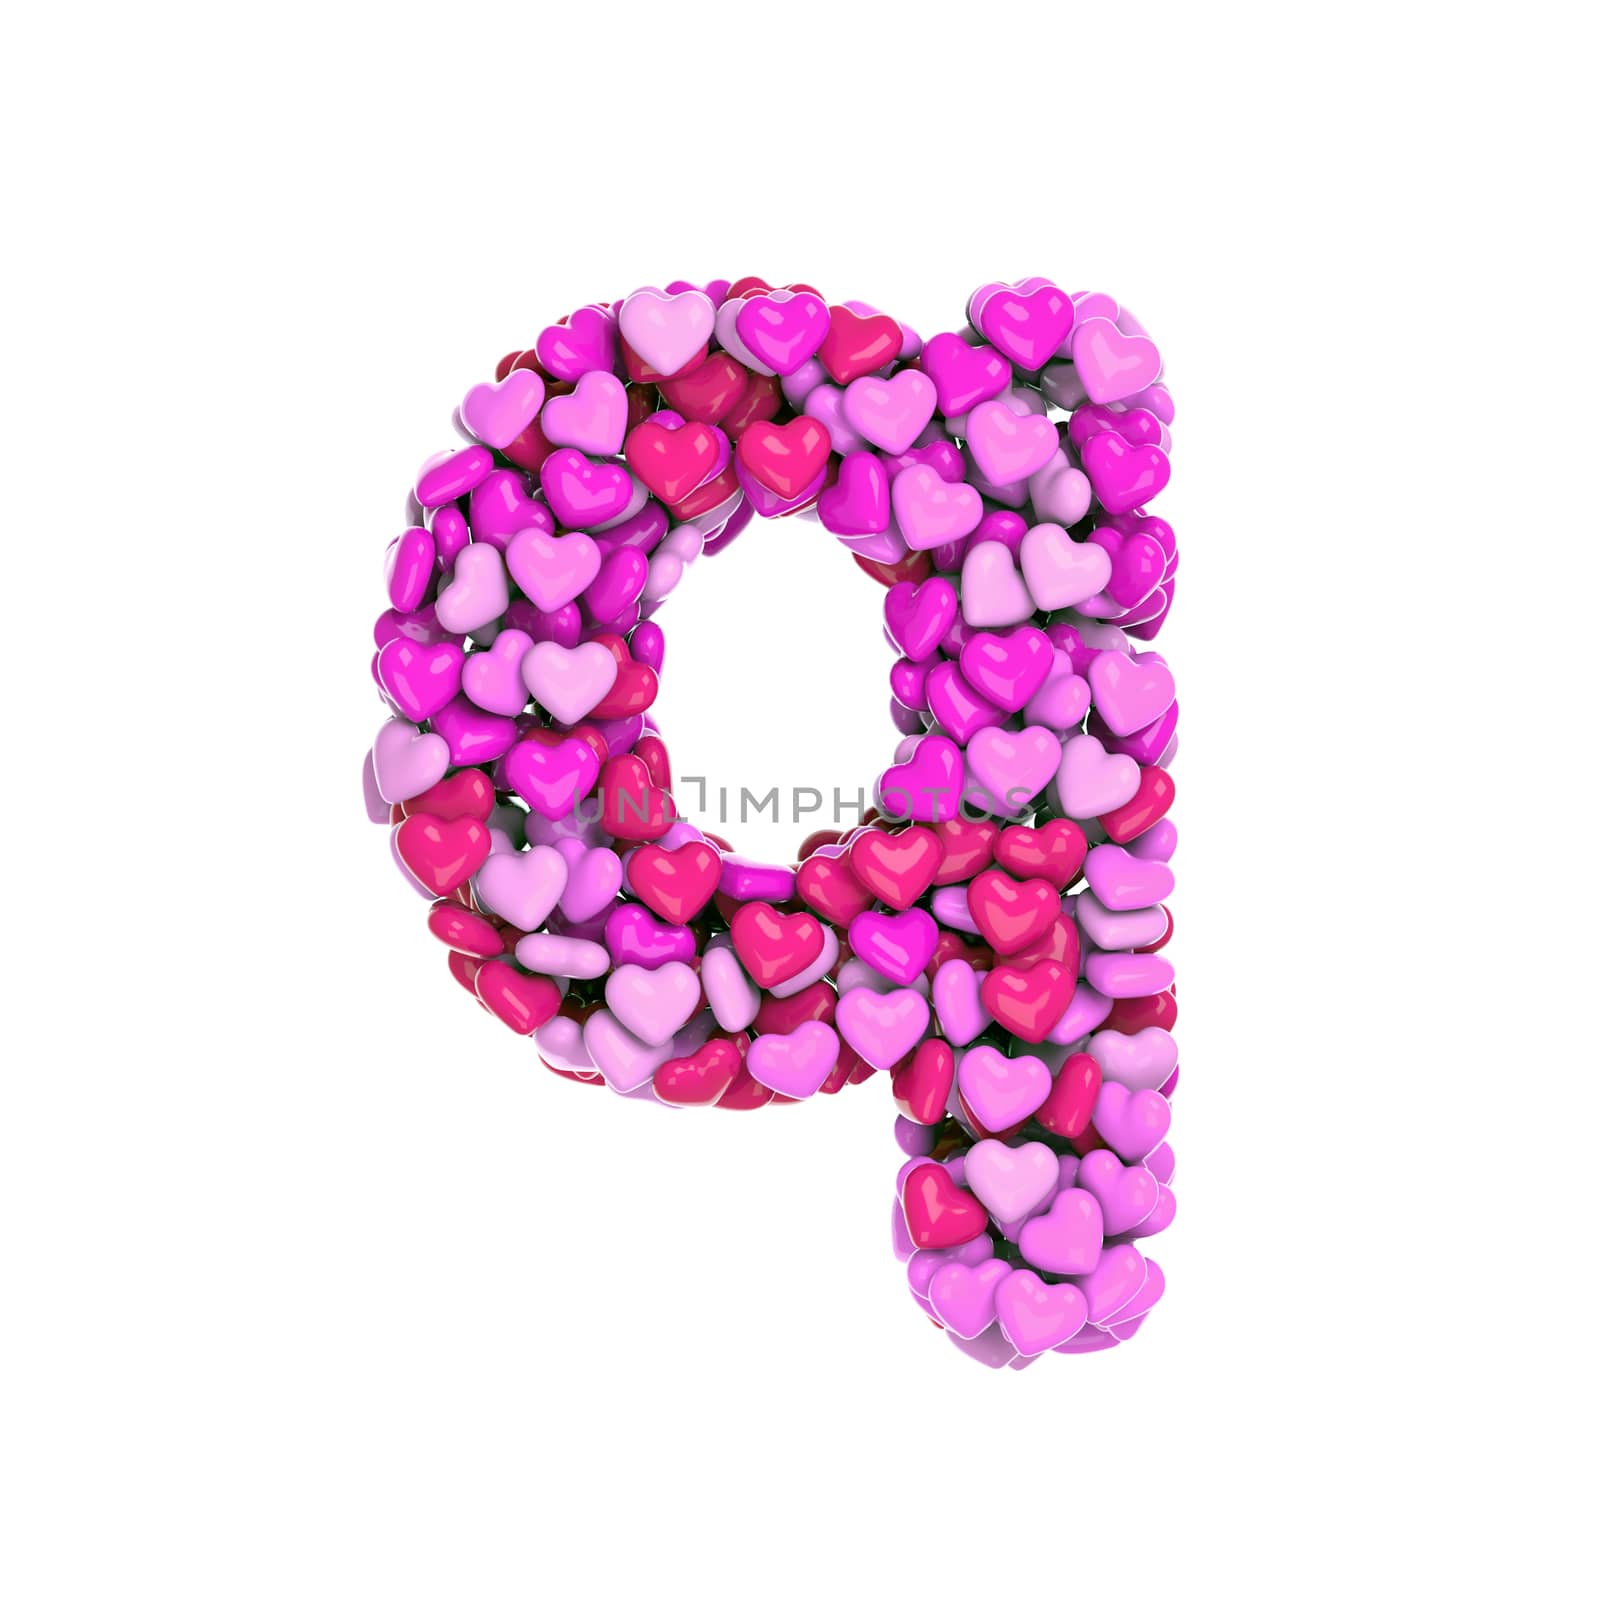 Valentine letter Q - Lower-case 3d pink hearts font - Love, passion or wedding concept by chrisroll